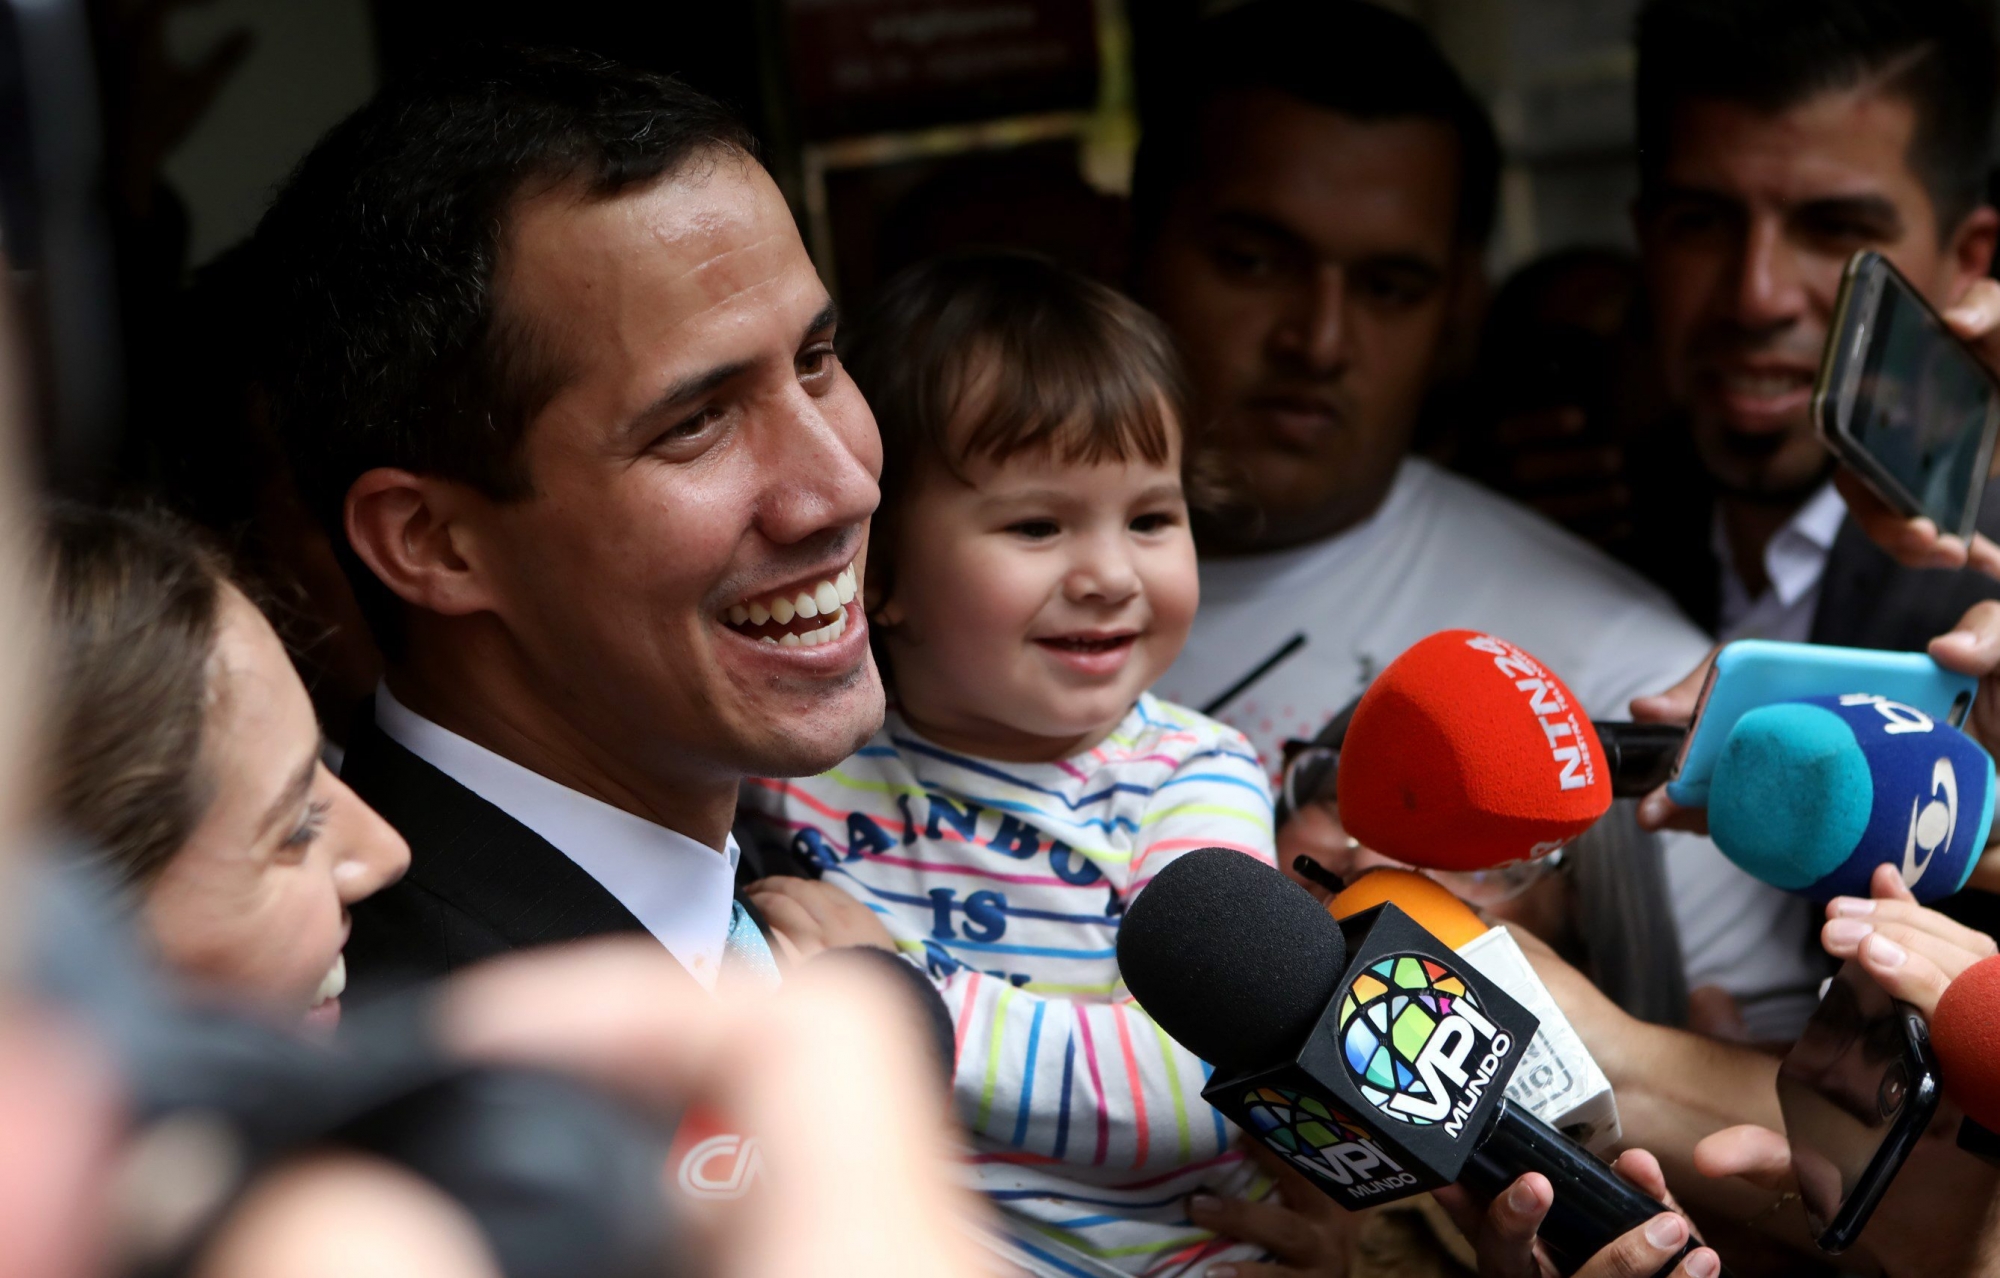 epa07334265 President of the Venezuelan National Assembly Juan Guaido (C) addresses the media next to his wife Fabiana Rosales (L) and daughter Miranda (R) at their home in Caracas, Venezuela, 31 January 2019. according to reports, Guaido, who self-proclaimed as a president on 23 January, said a special police unit arrived in his house to interrogate his wife and he made president Nicolas Maduro responsible for the security of his family.  EPA/CRISTIAN HERNANDEZ VENEZUELA CRISIS